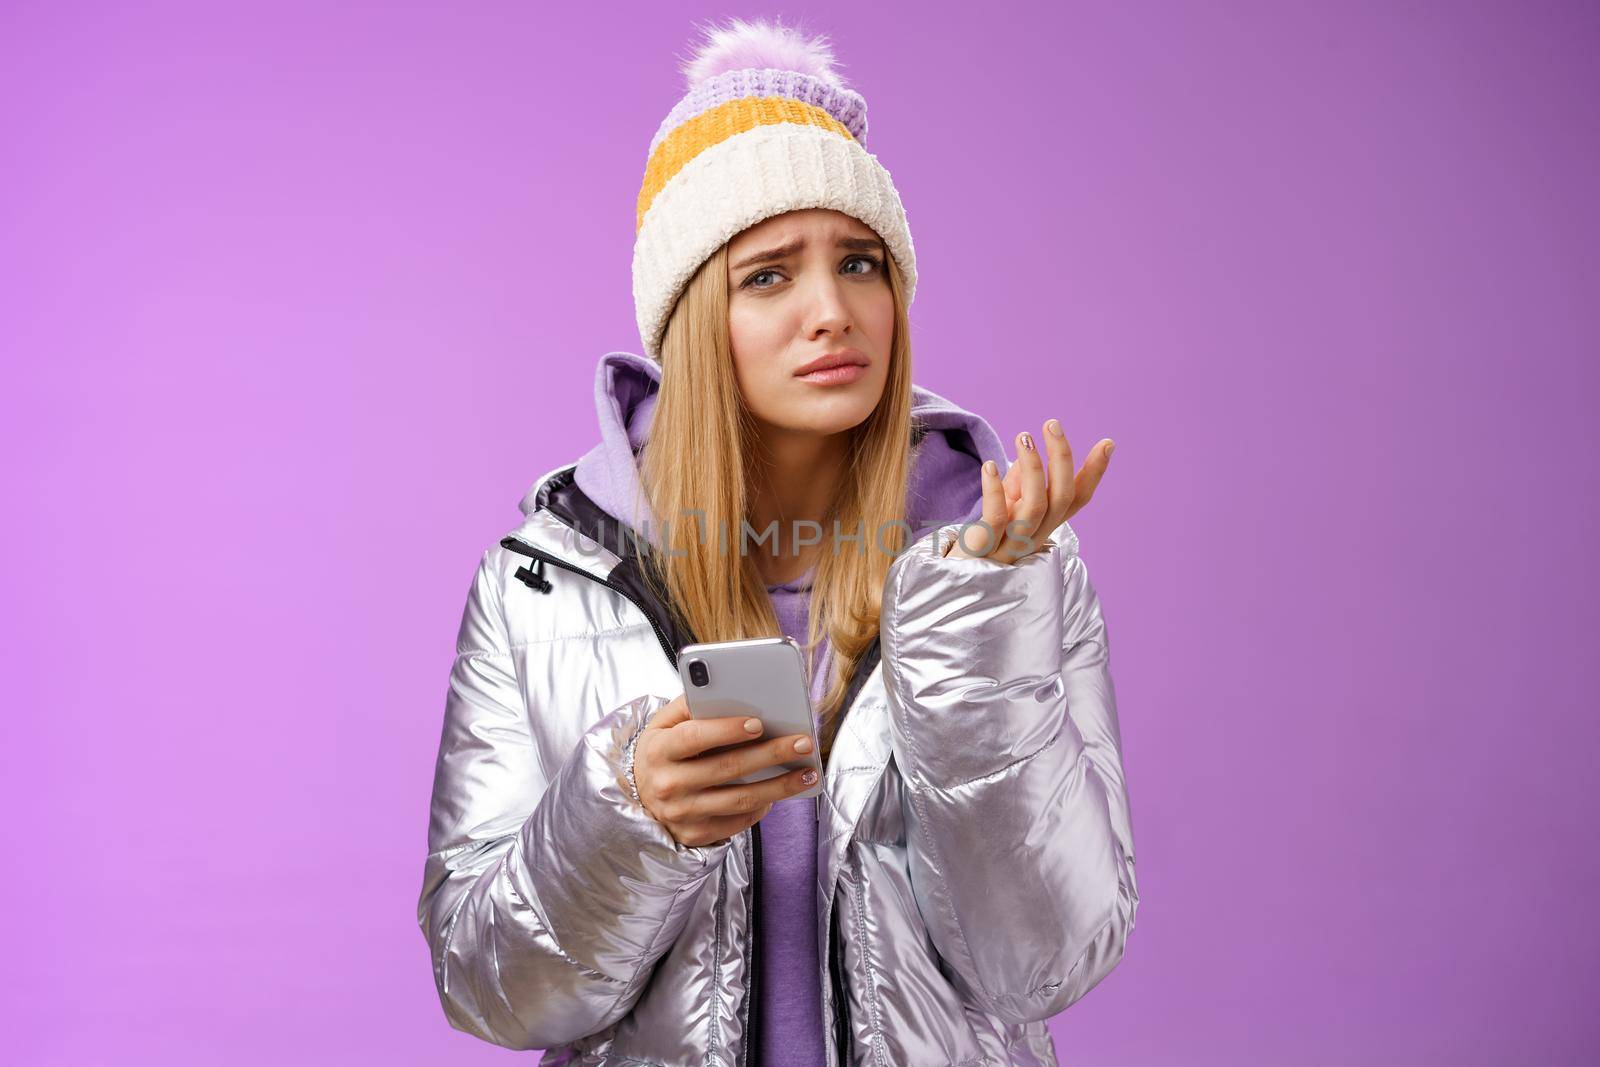 Questioned complicated cute blond girlfriend receive strange message look perplexed confused raising hand shrugging lift eyebrow cannot understand meaning holding smartphone, purple background.